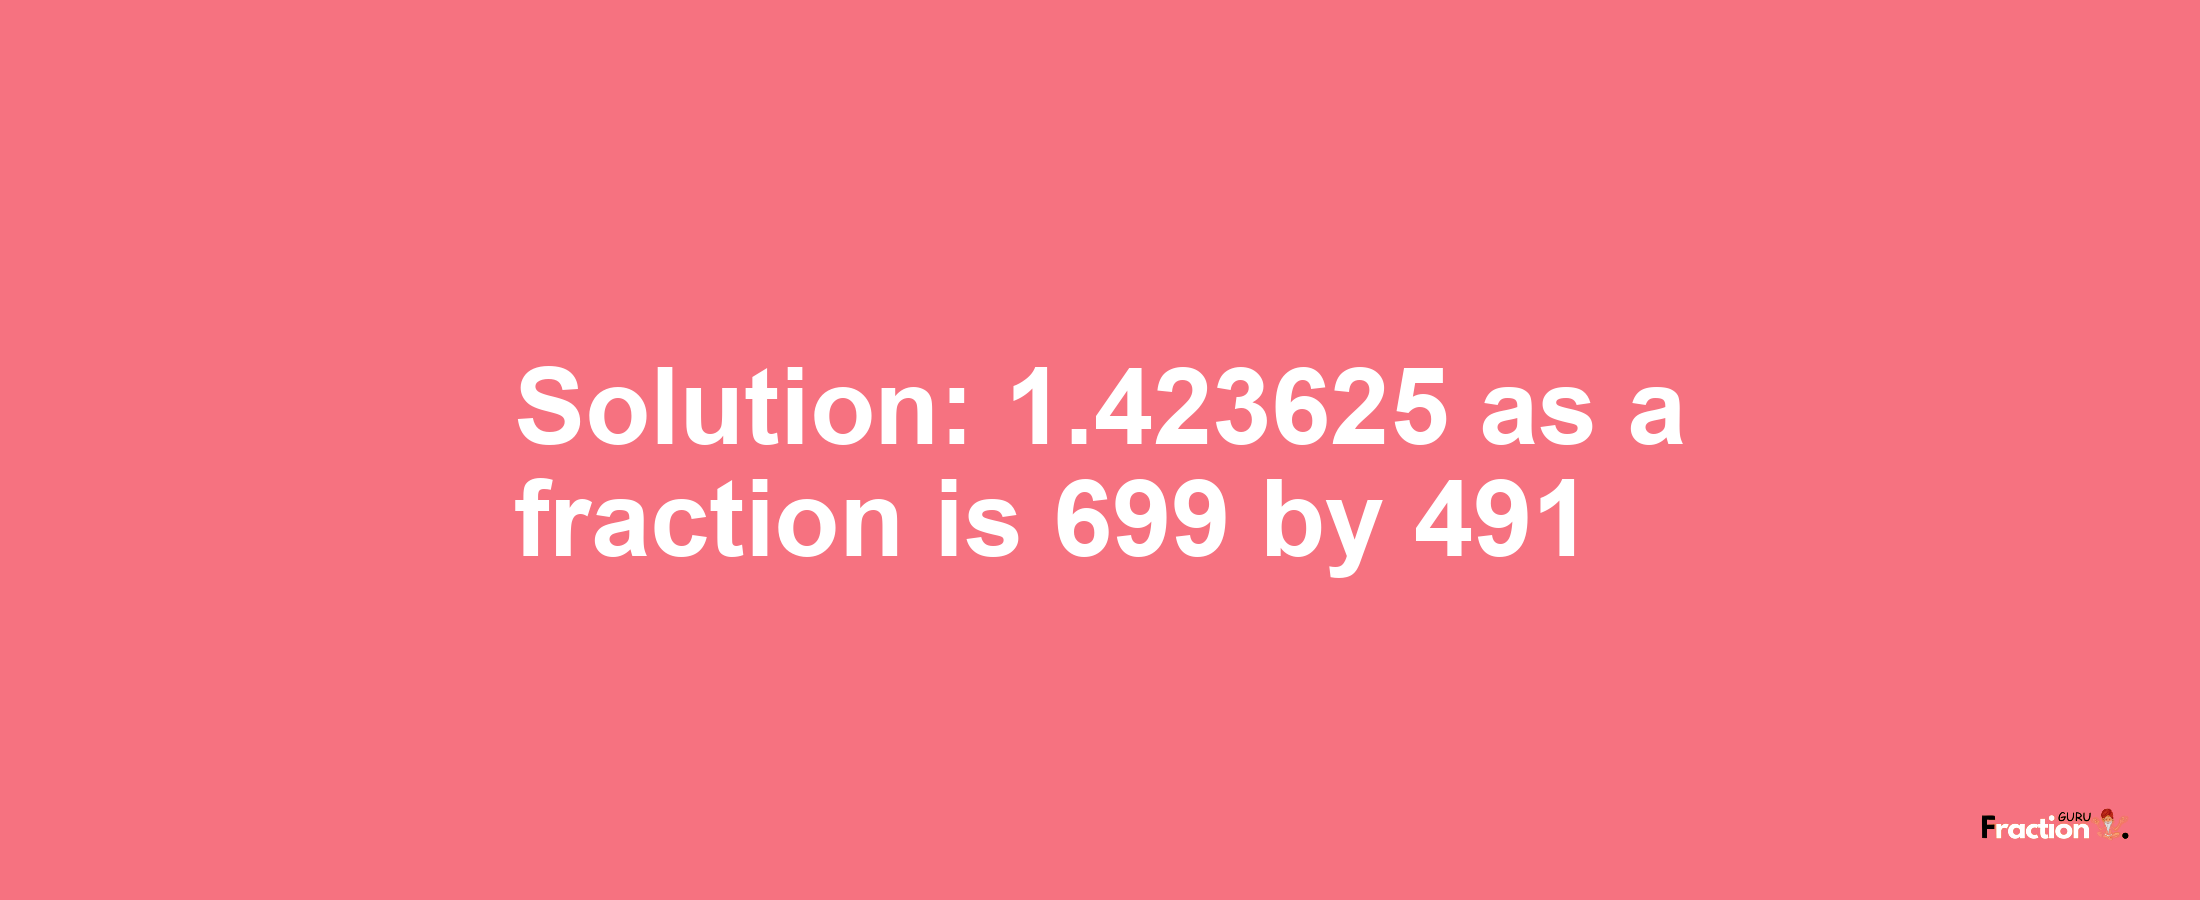 Solution:1.423625 as a fraction is 699/491